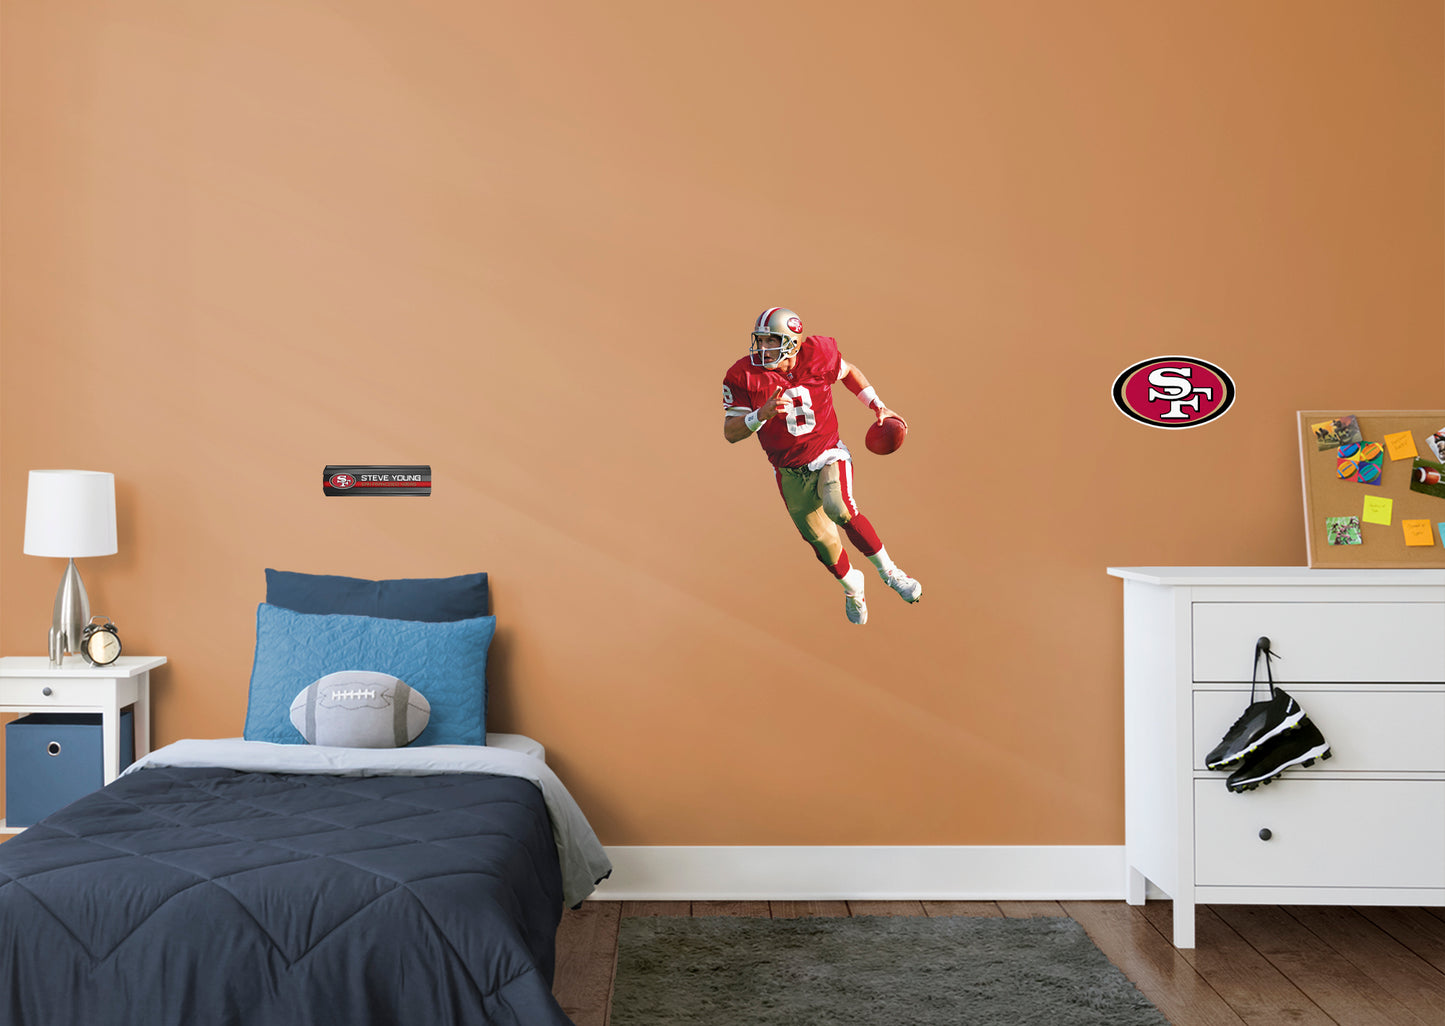 San Francisco 49ers: Steve Young  Legend        - Officially Licensed NFL Removable Wall   Adhesive Decal